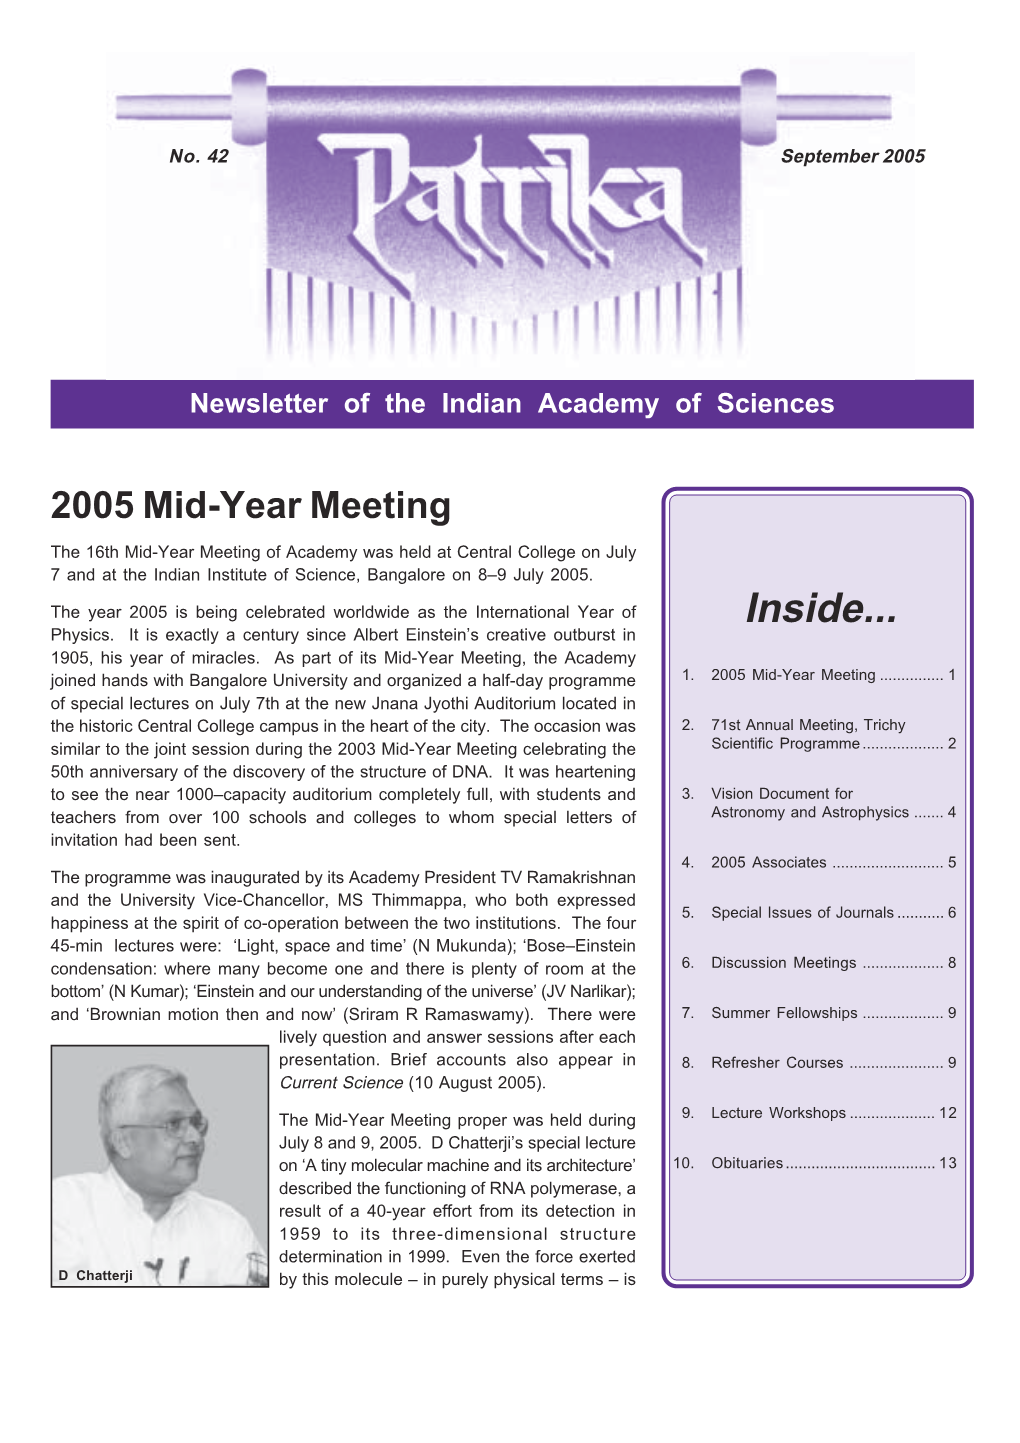 2005 Mid-Year Meeting